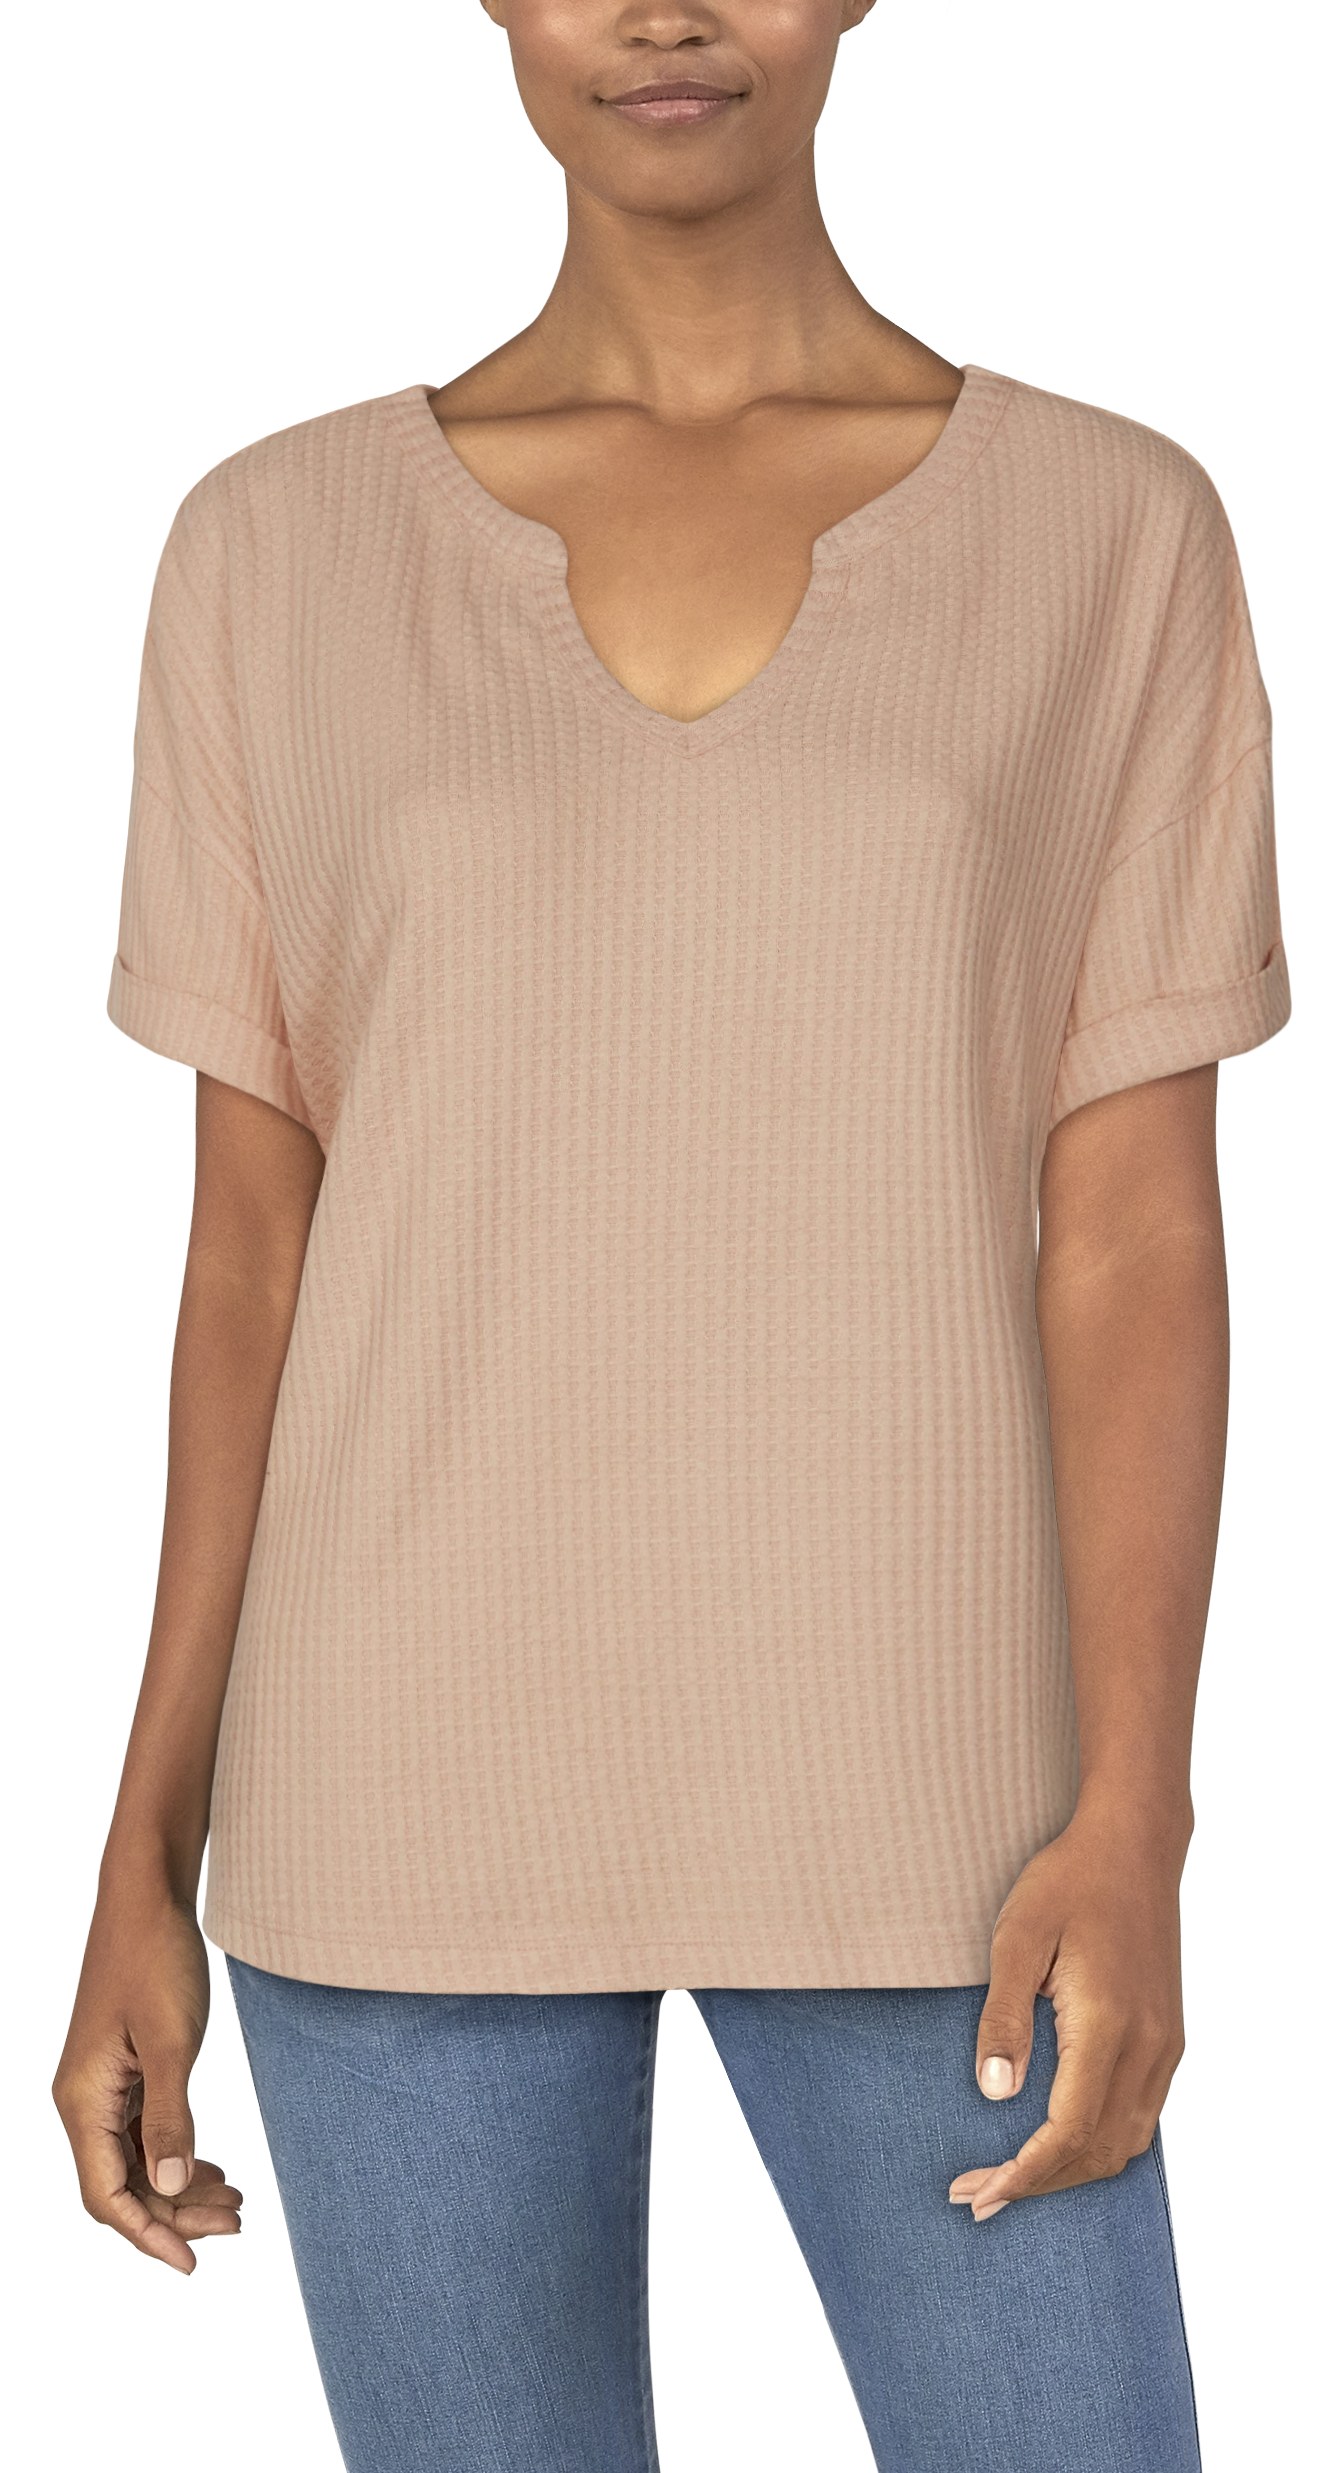 Natural Reflections Brush Creek Waffle Short-Sleeve Shirt for Ladies - Almost Apricot - XL